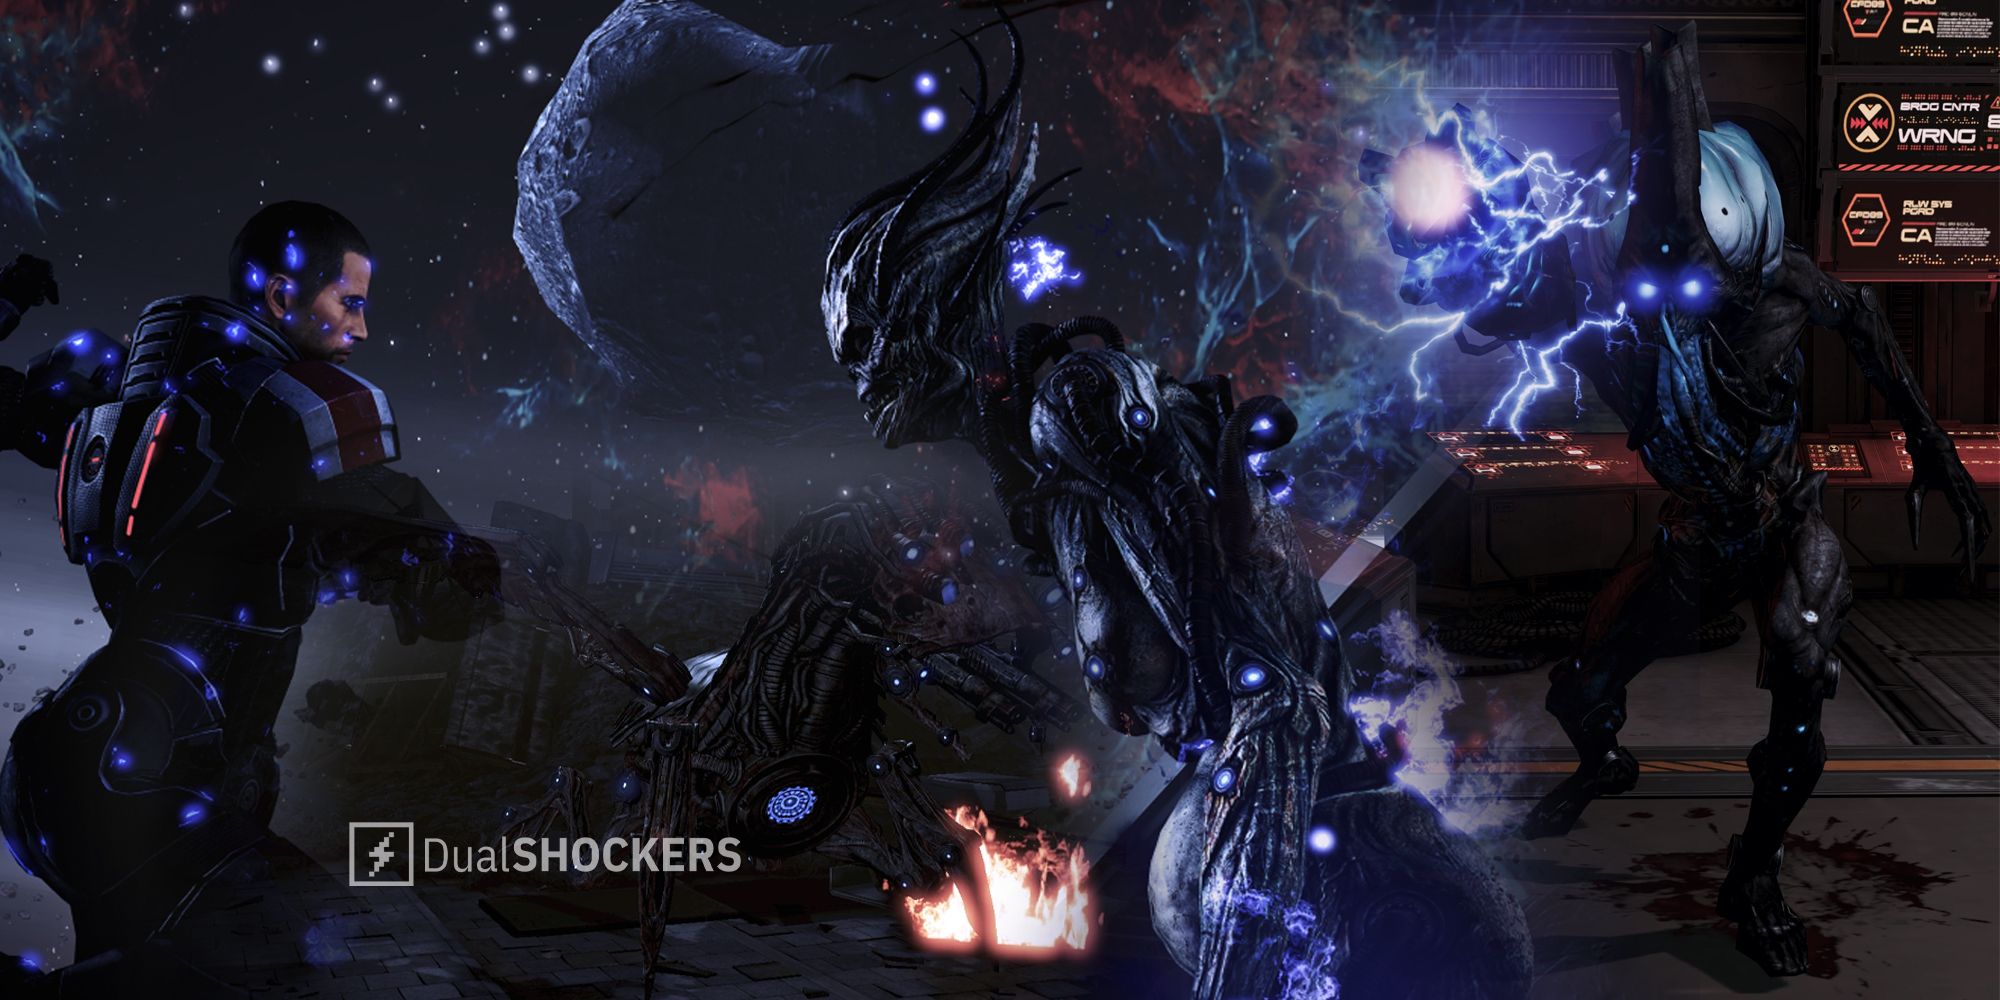 Mass Effect 3 enemies and combat gameplay